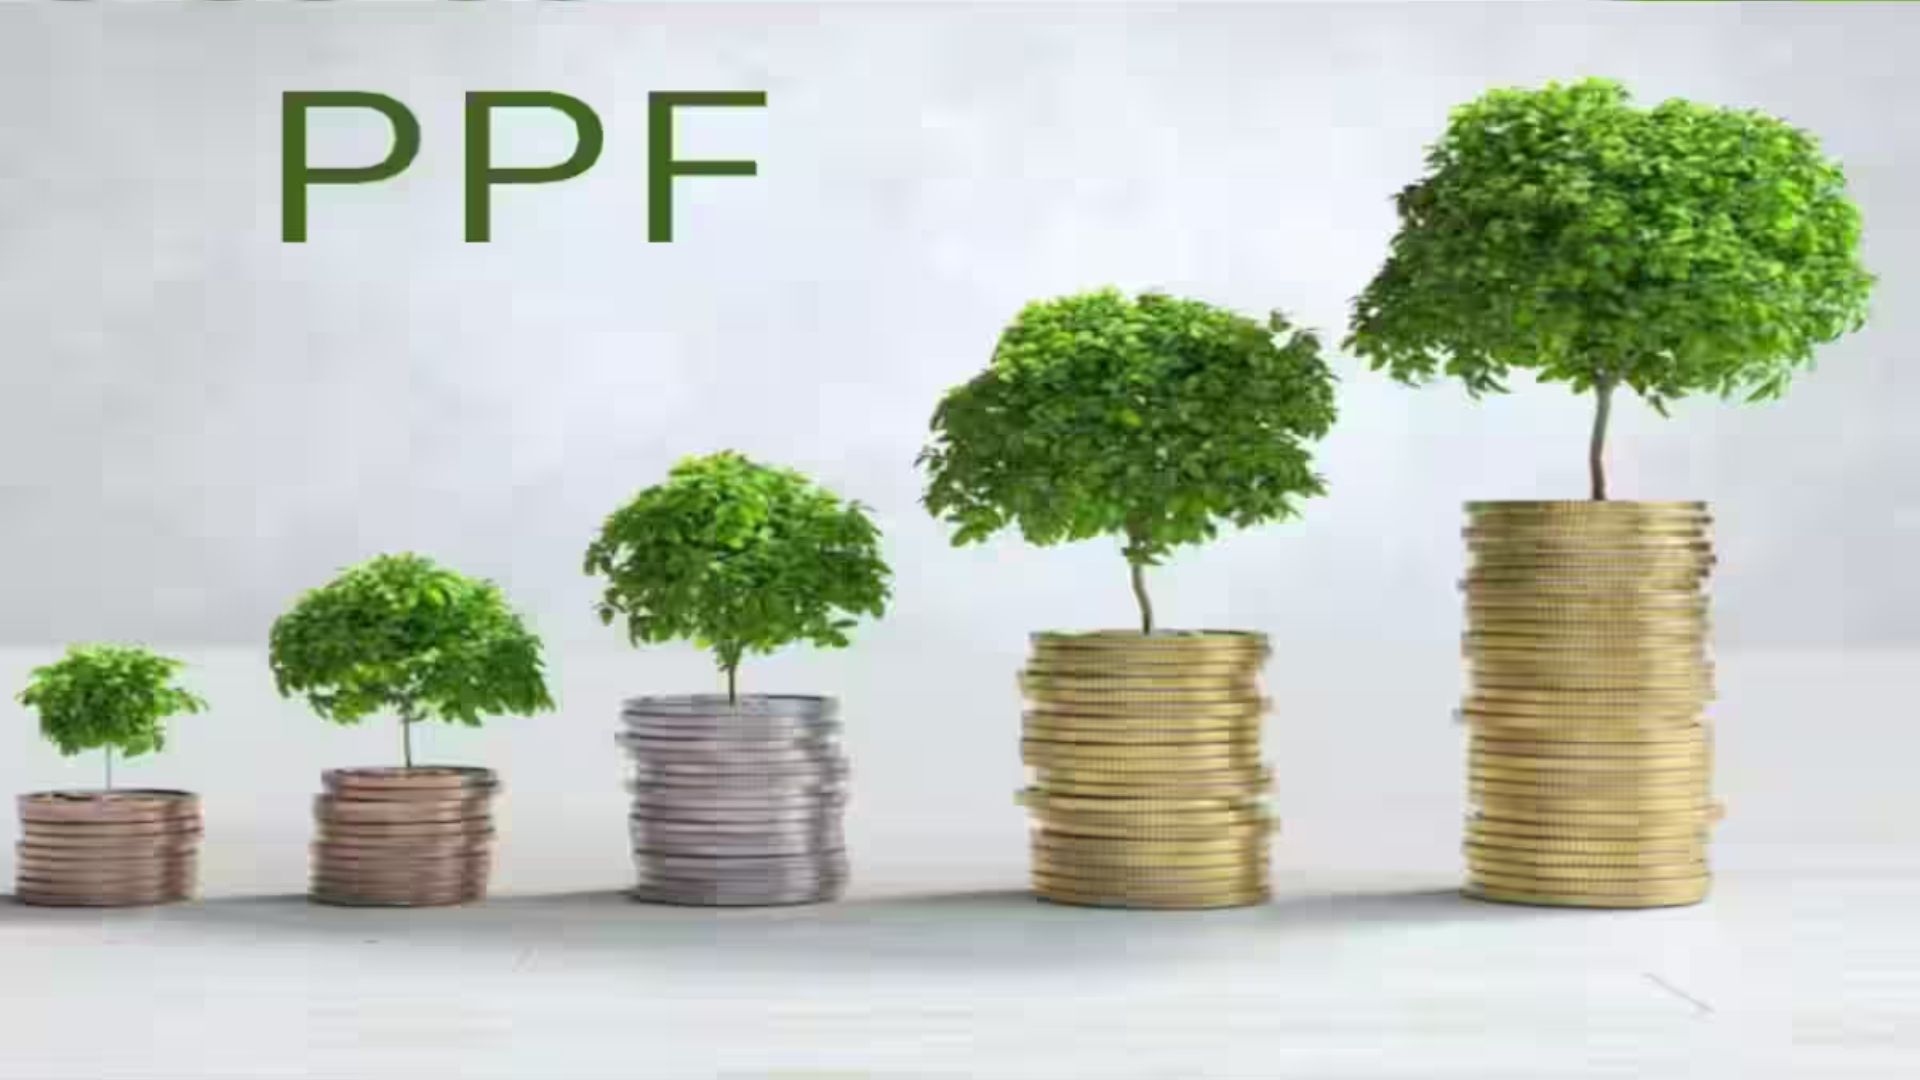 PPF Calculator You can earn Rs 1.74 crore only from interest on your PPF Know calculations